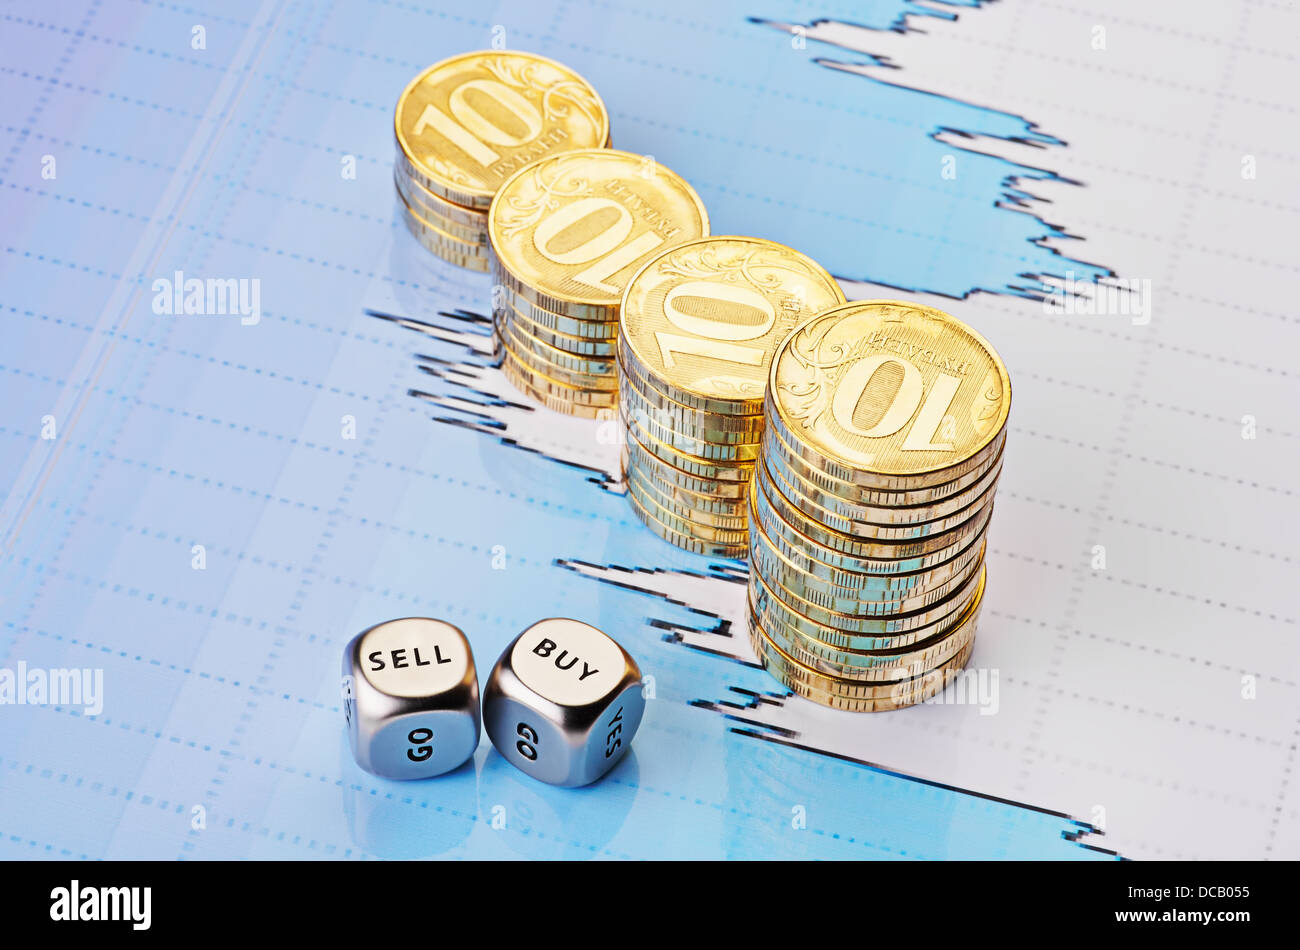 Dices cubes with the words SELL BUY, uptrend stacks of golden coins and financial chart as background. Selective focus. Stock Photo